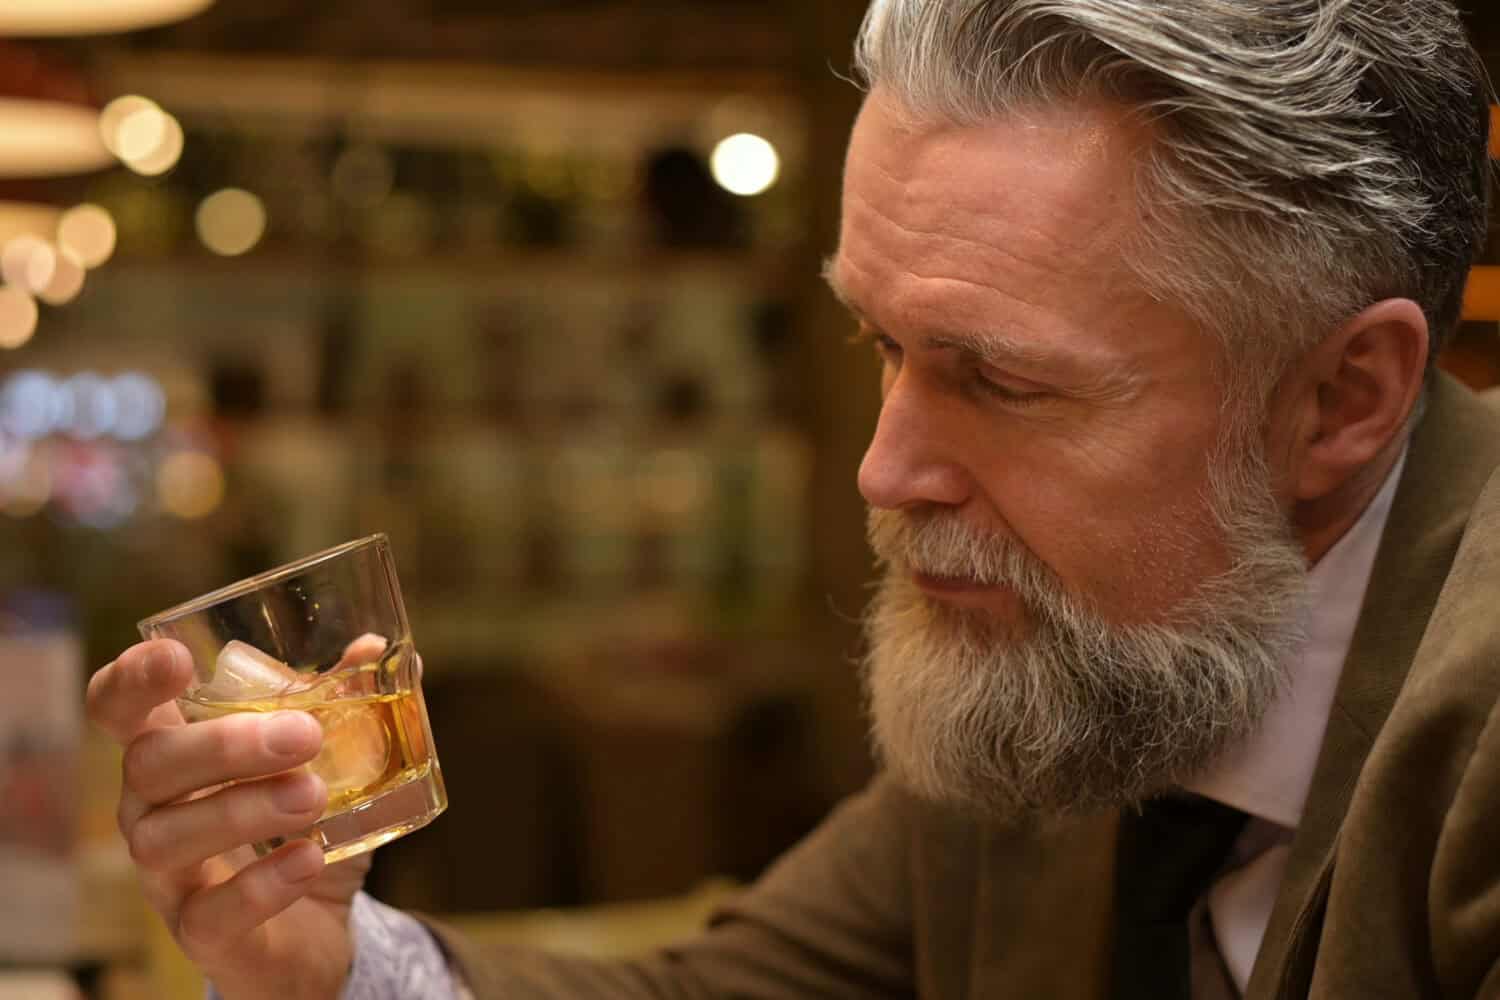 The gray-haired man looks at the whiskey glass in his hand. Adult man drinking in a restaurant